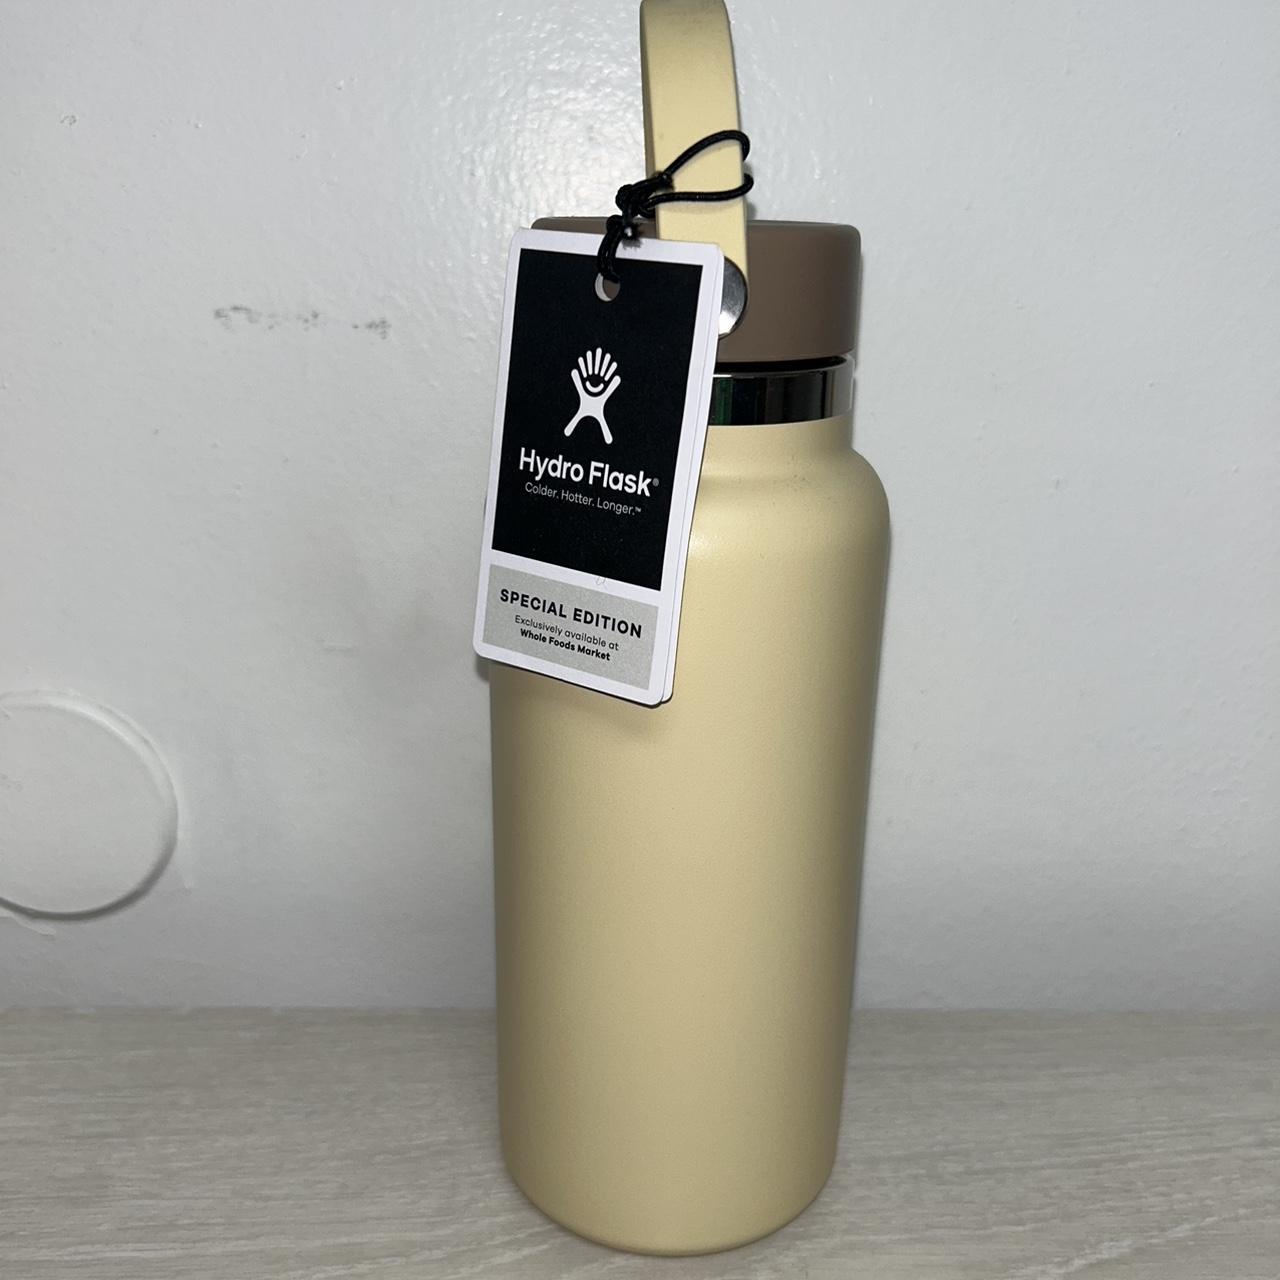 I recently saw someone purchase the 'Beech' exclusive hydro flask from  Whole Foods and would love to get one but I live in Australia where there  is no Whole Foods. I was